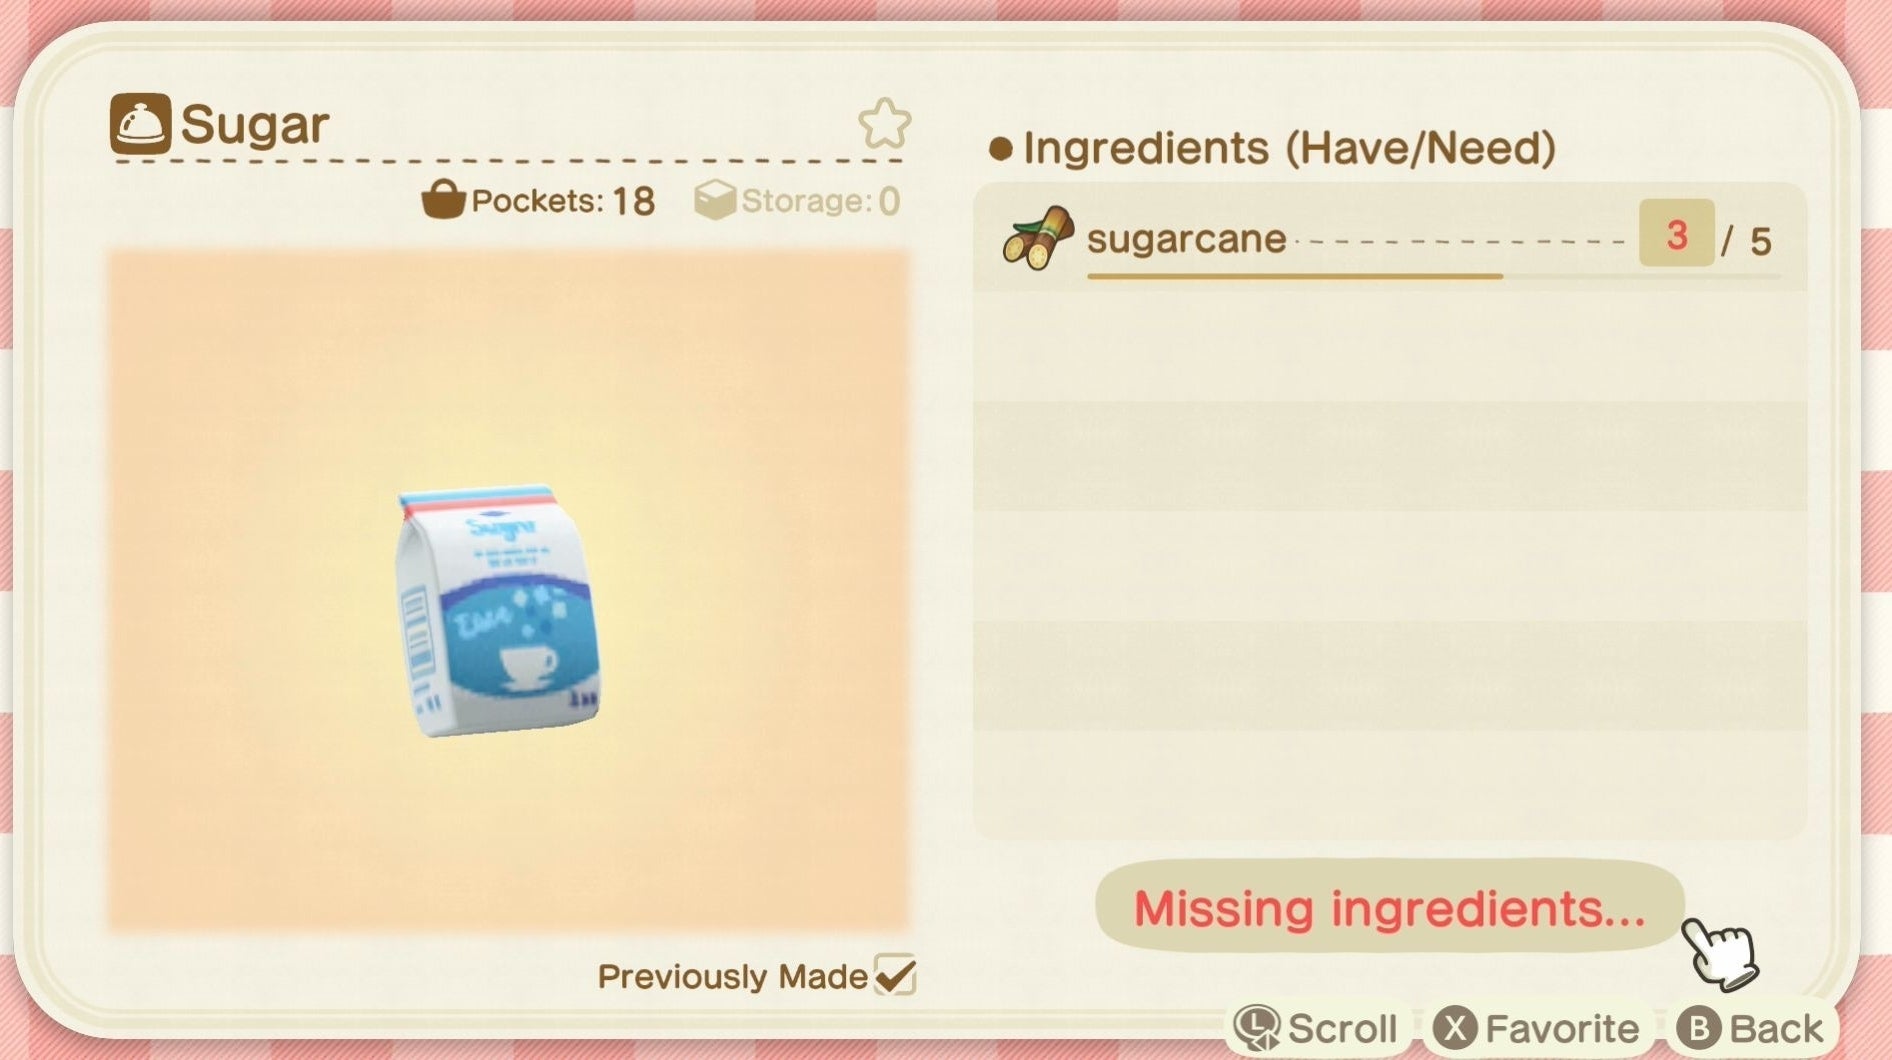 Animal Crossing Sugar: How to grow sugarcane and find sugar in New Horizons